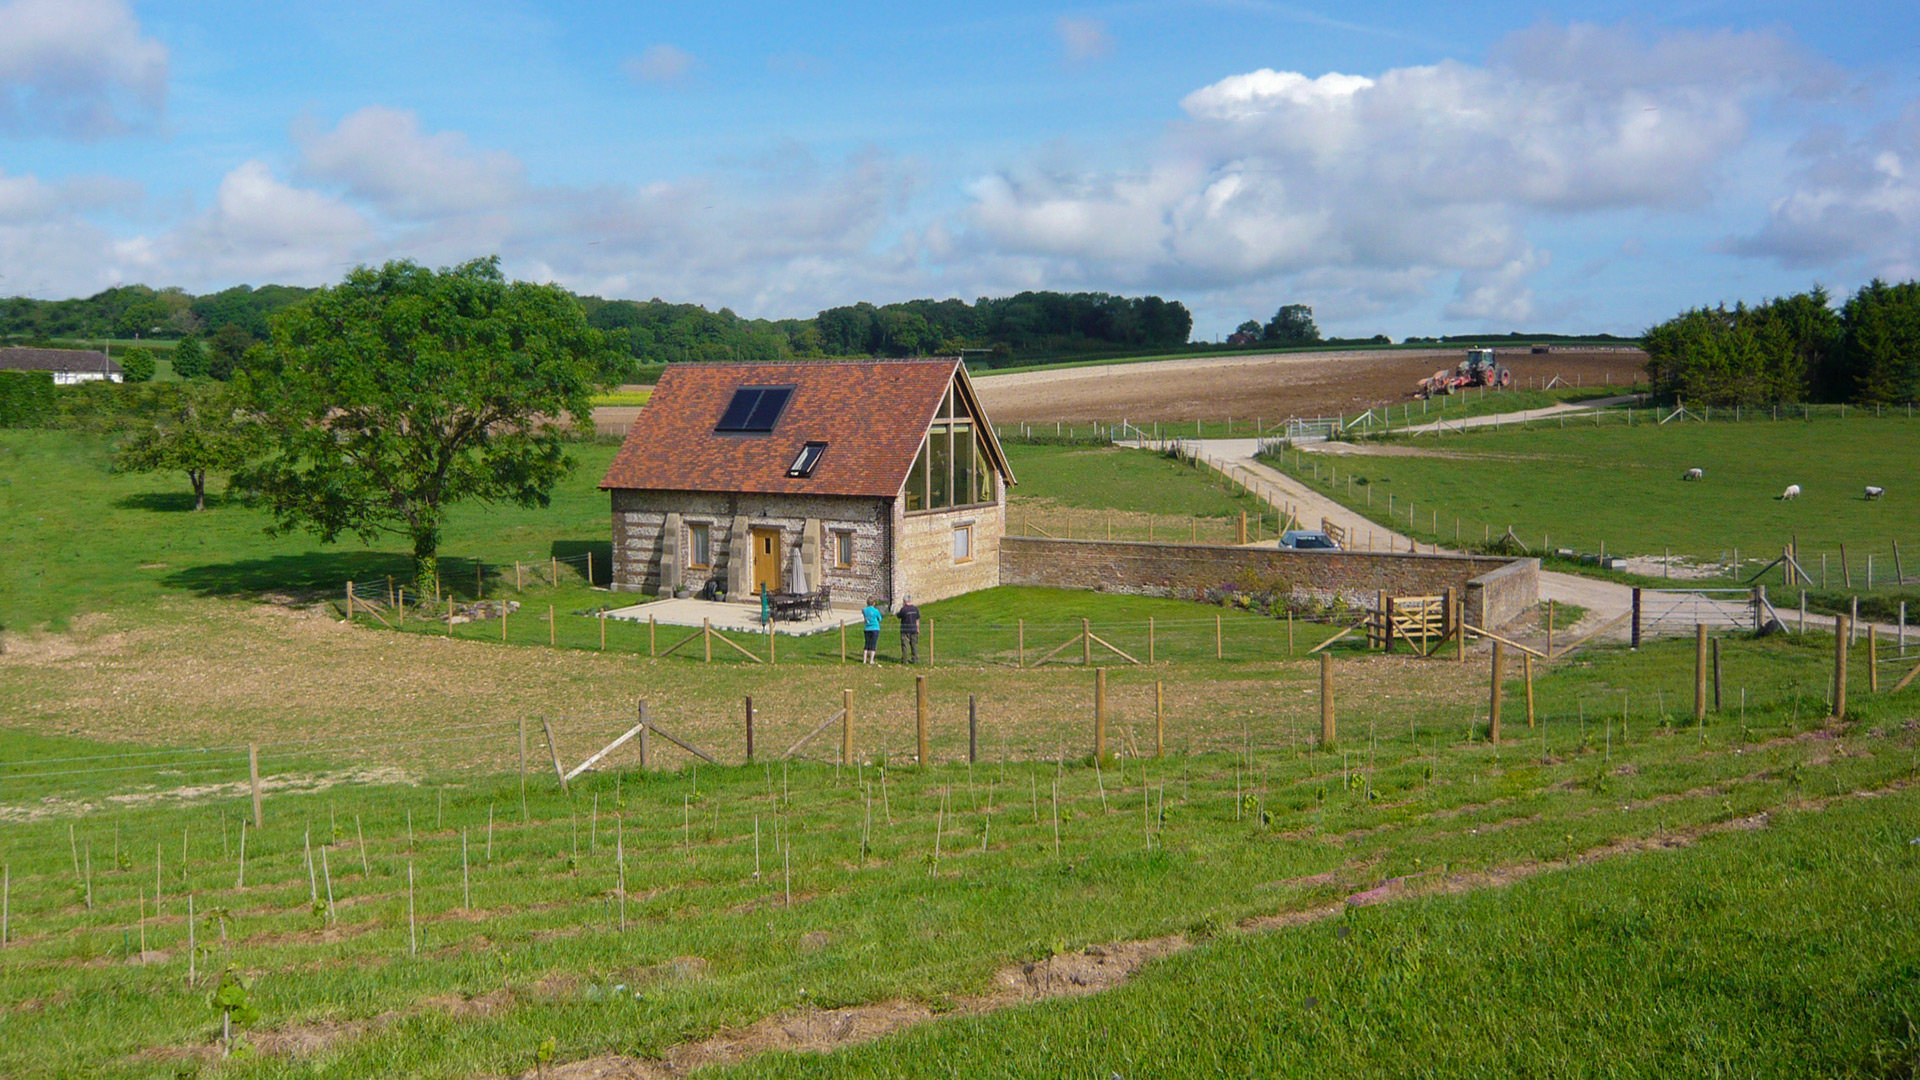 distant view of converted barn with red roof and solar panel surrounded by fields